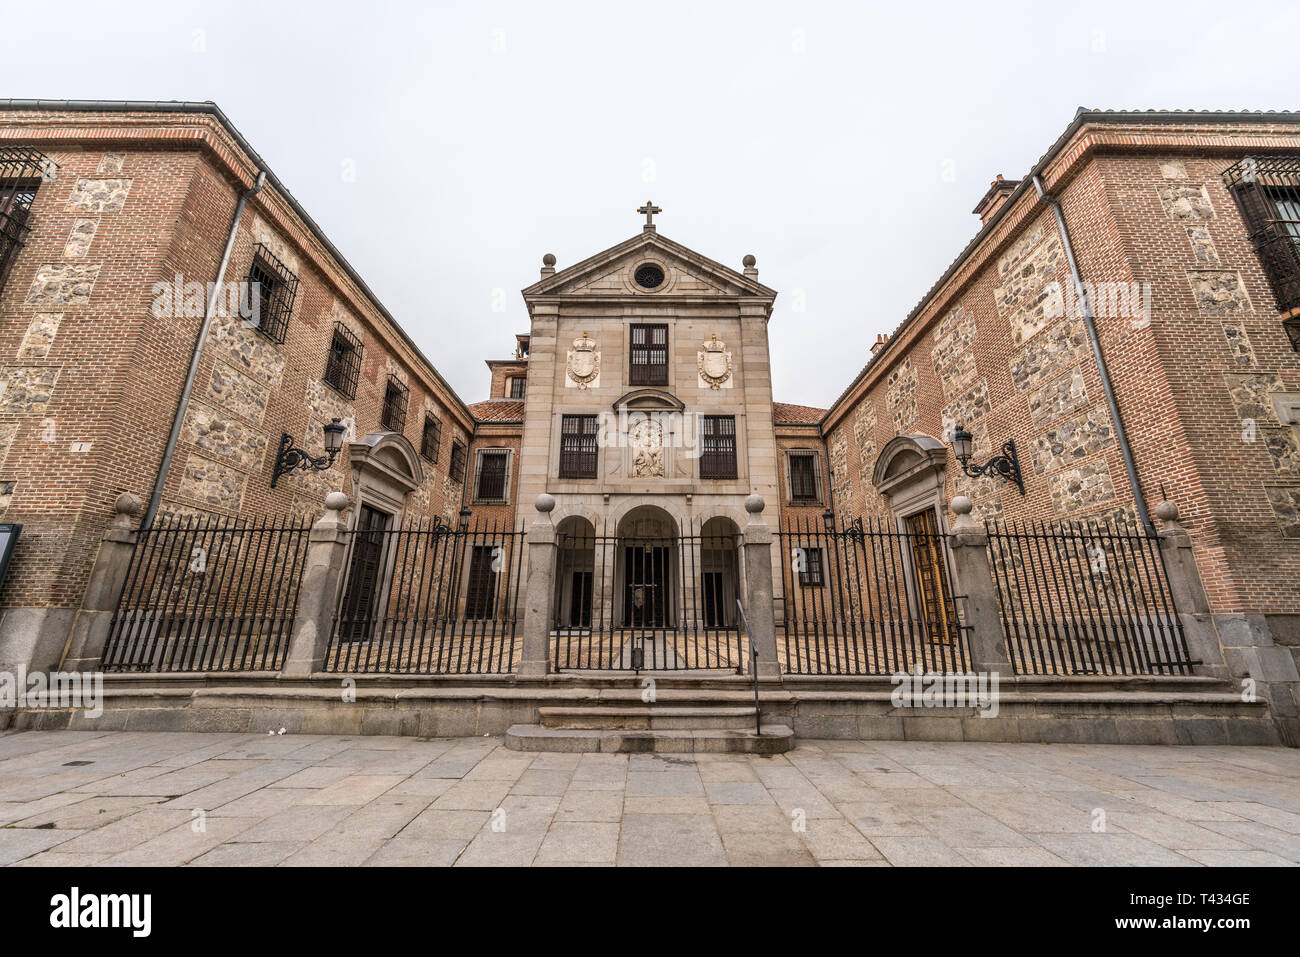 Exterior fcade of Real Monasterio de la Encarnacion (Royal Monastery of the Incarnation) Convent of the order of Recolet Augustines. Located in Madrid Stock Photo